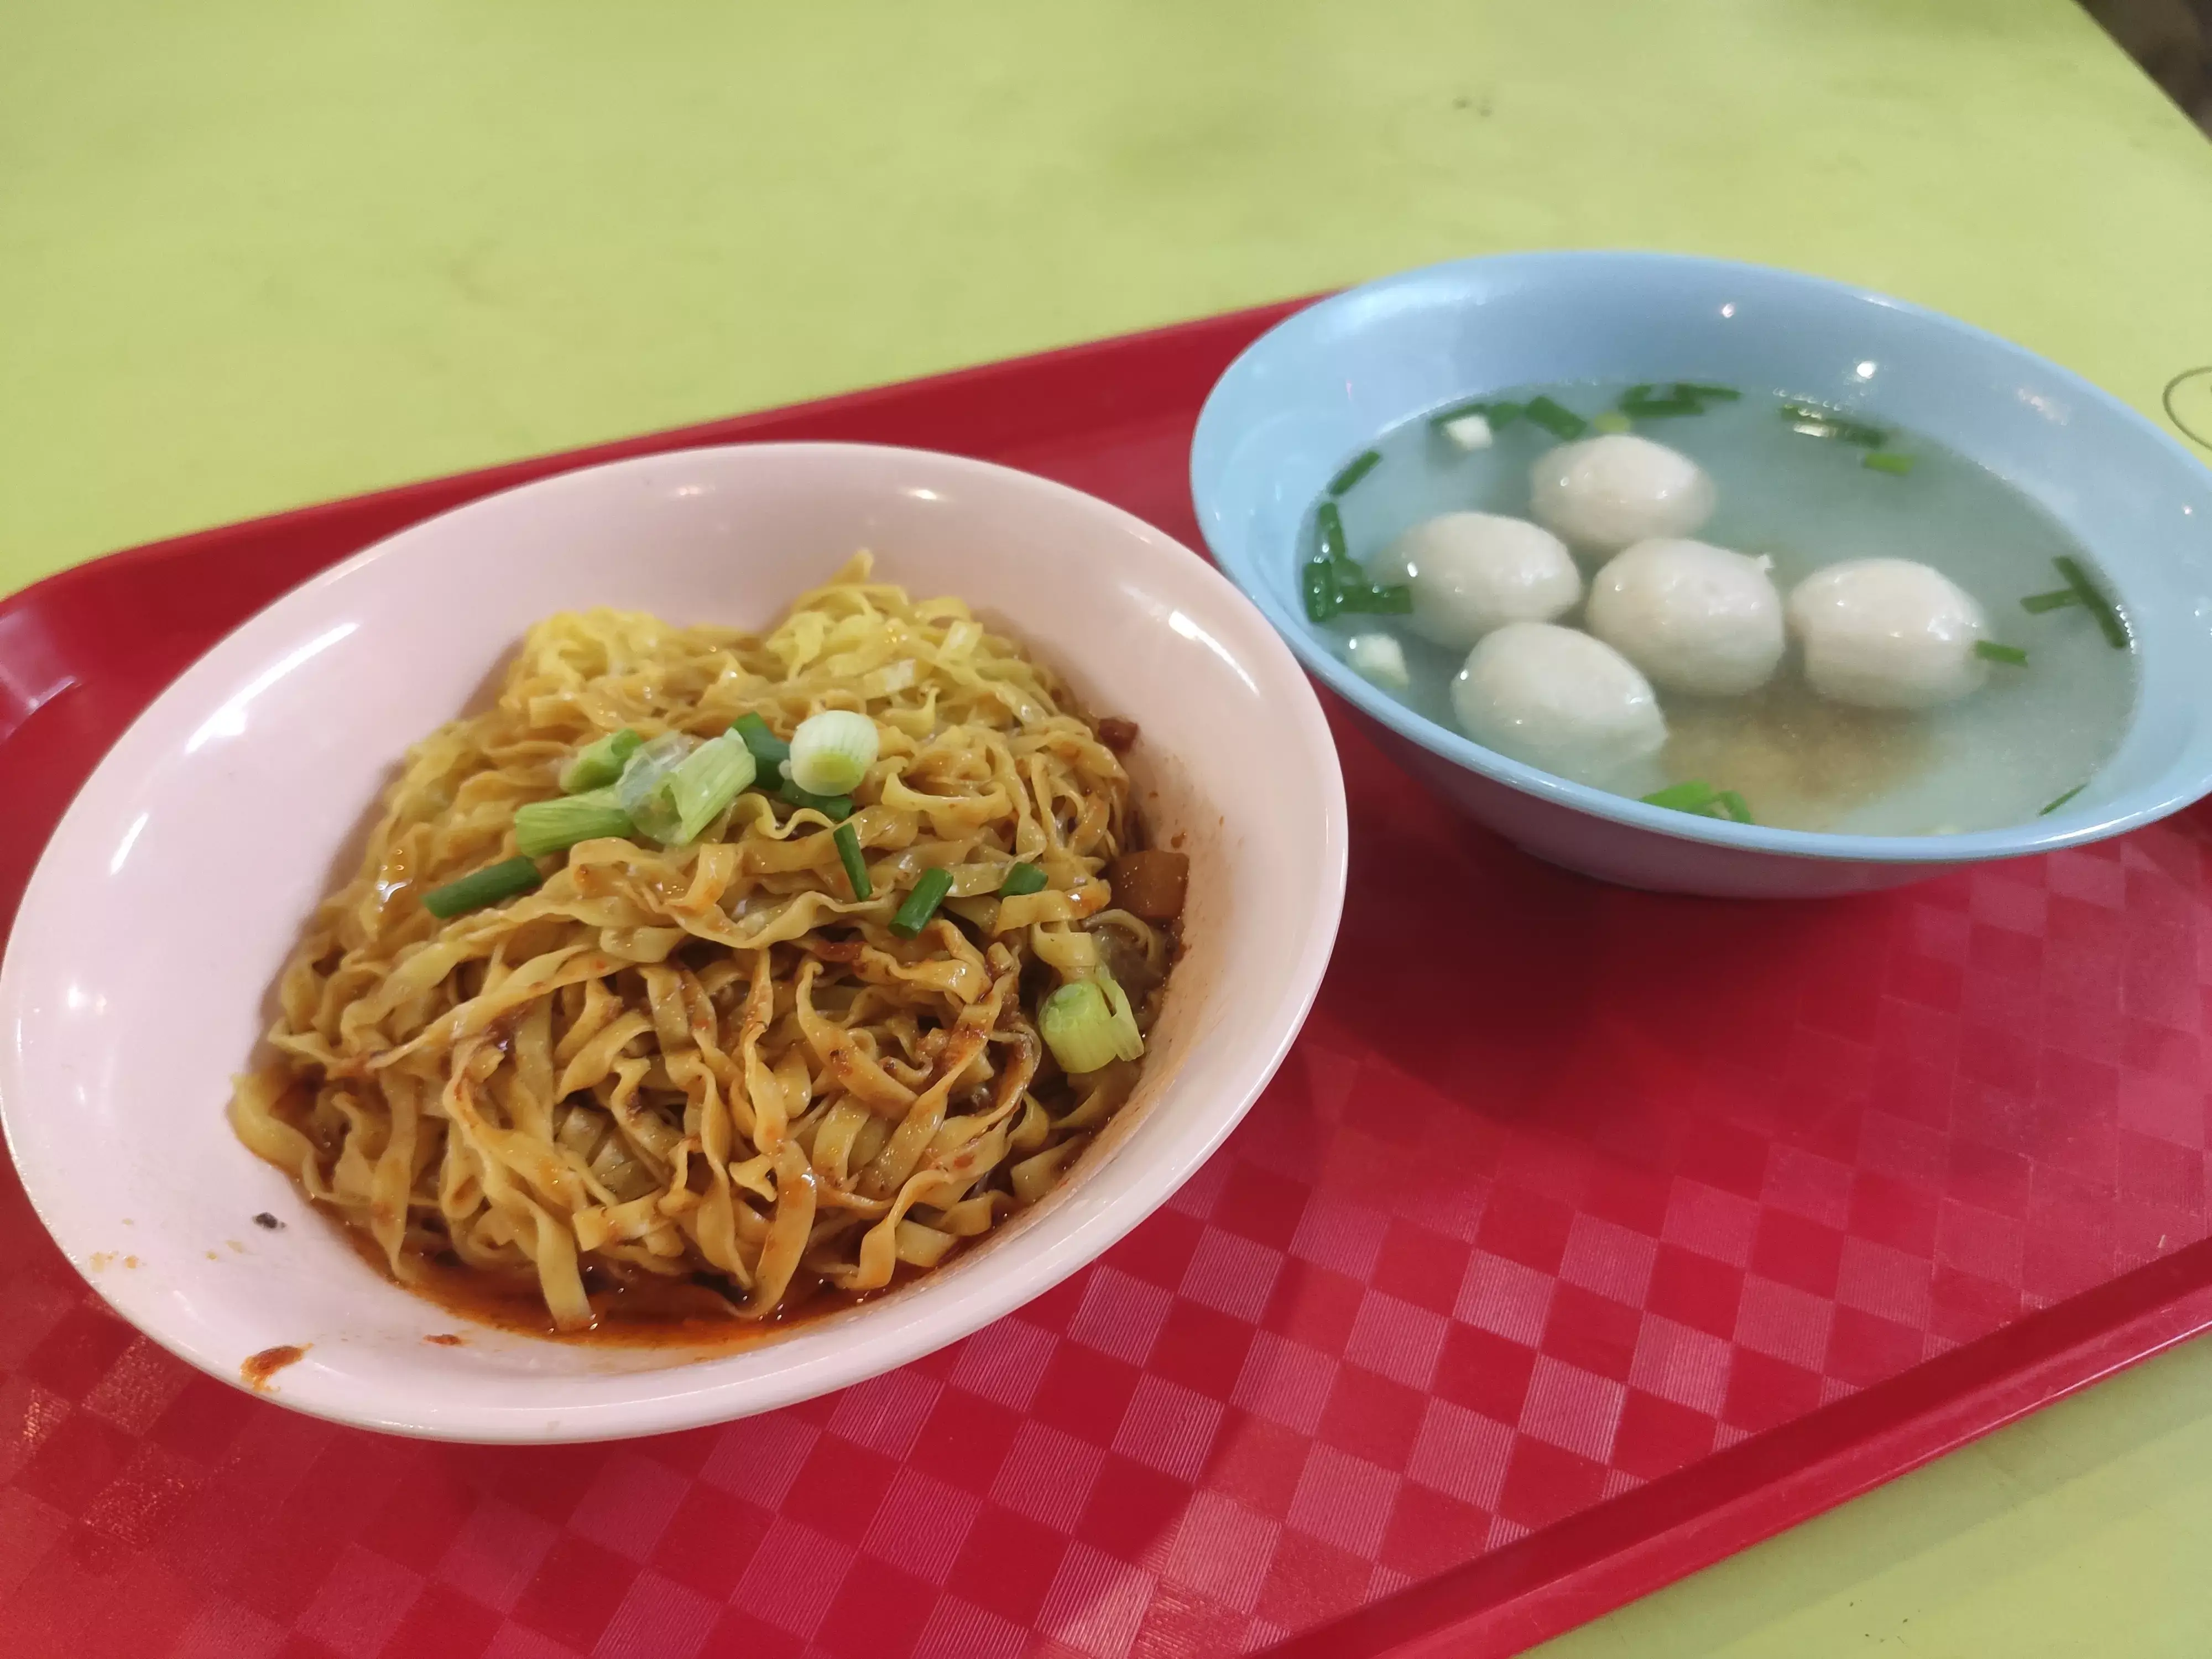 Review: Song Heng Fish Ball Noodle (Singapore)